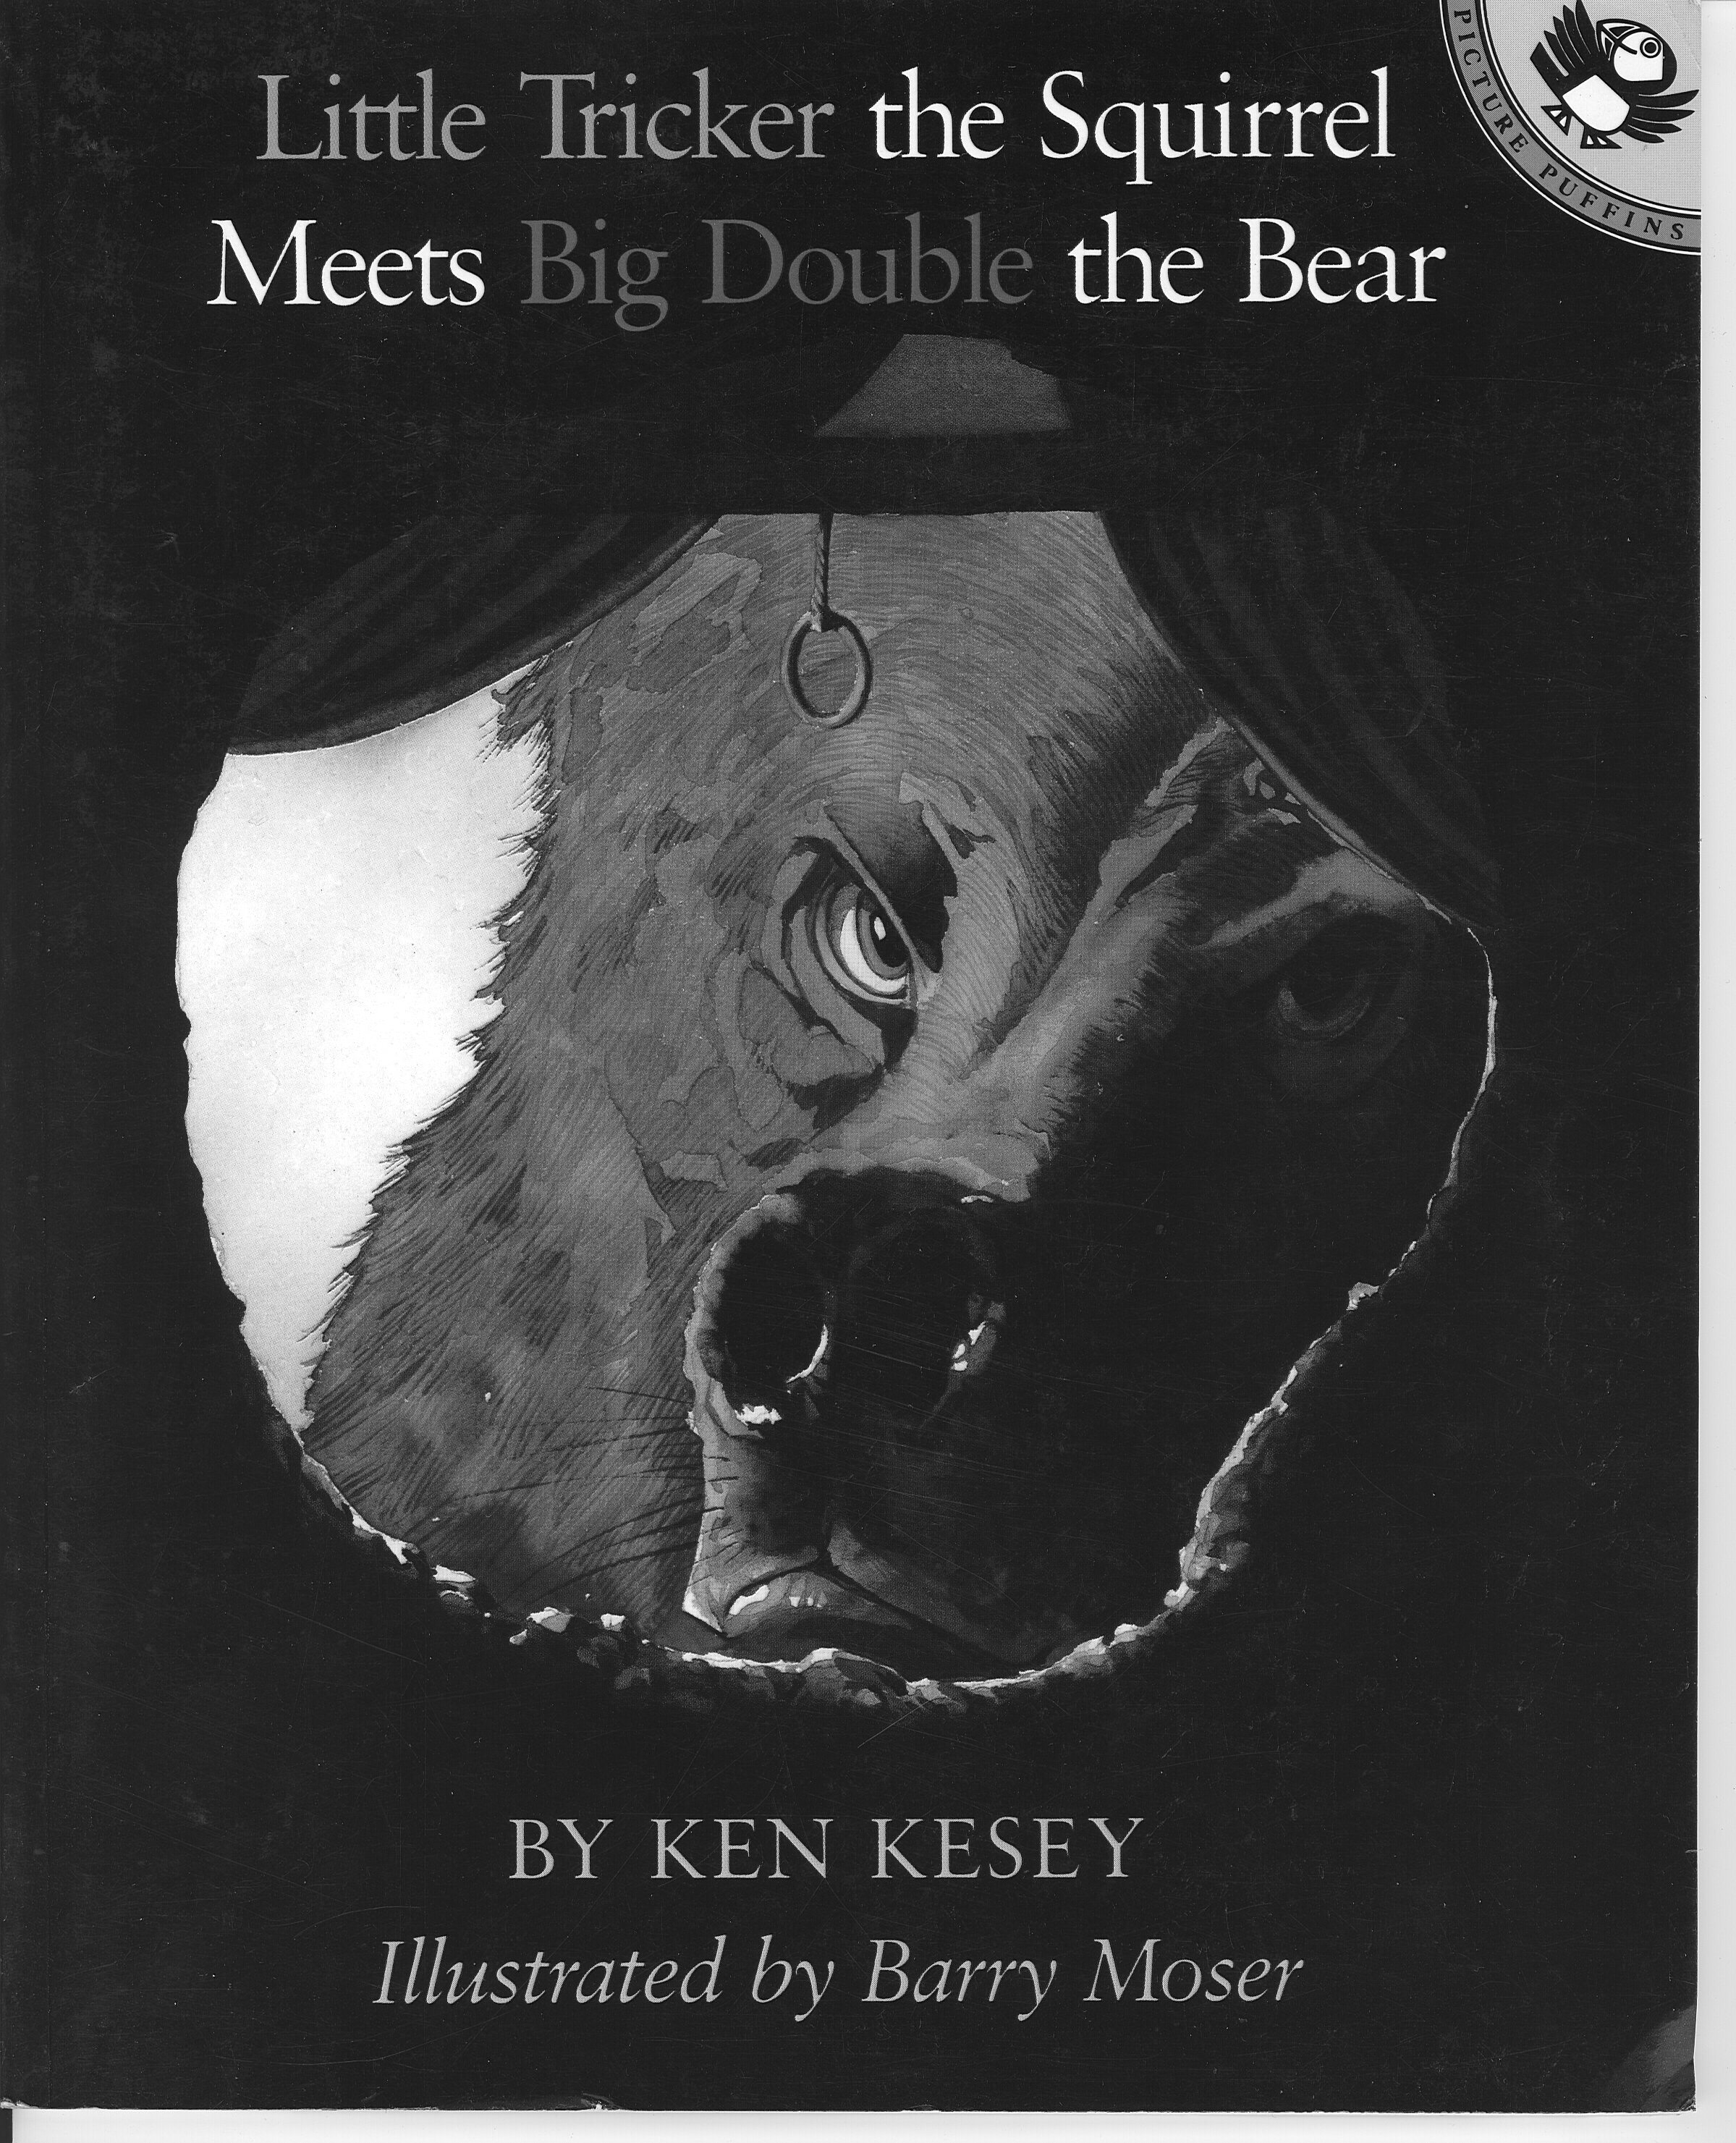 Image of the cover of the children's book, Little Tricker the Squirrel Meets Big Double the Bear, by author Ken Kesey. Illustrated by Barry Moser. The cover of the book features the illustration of a frustrated bear, looking into the hole of a tree trunk, that is someone's home. The hole has curtains which are pulled back to each side, and the pull ring of a roller blind is hanging down.